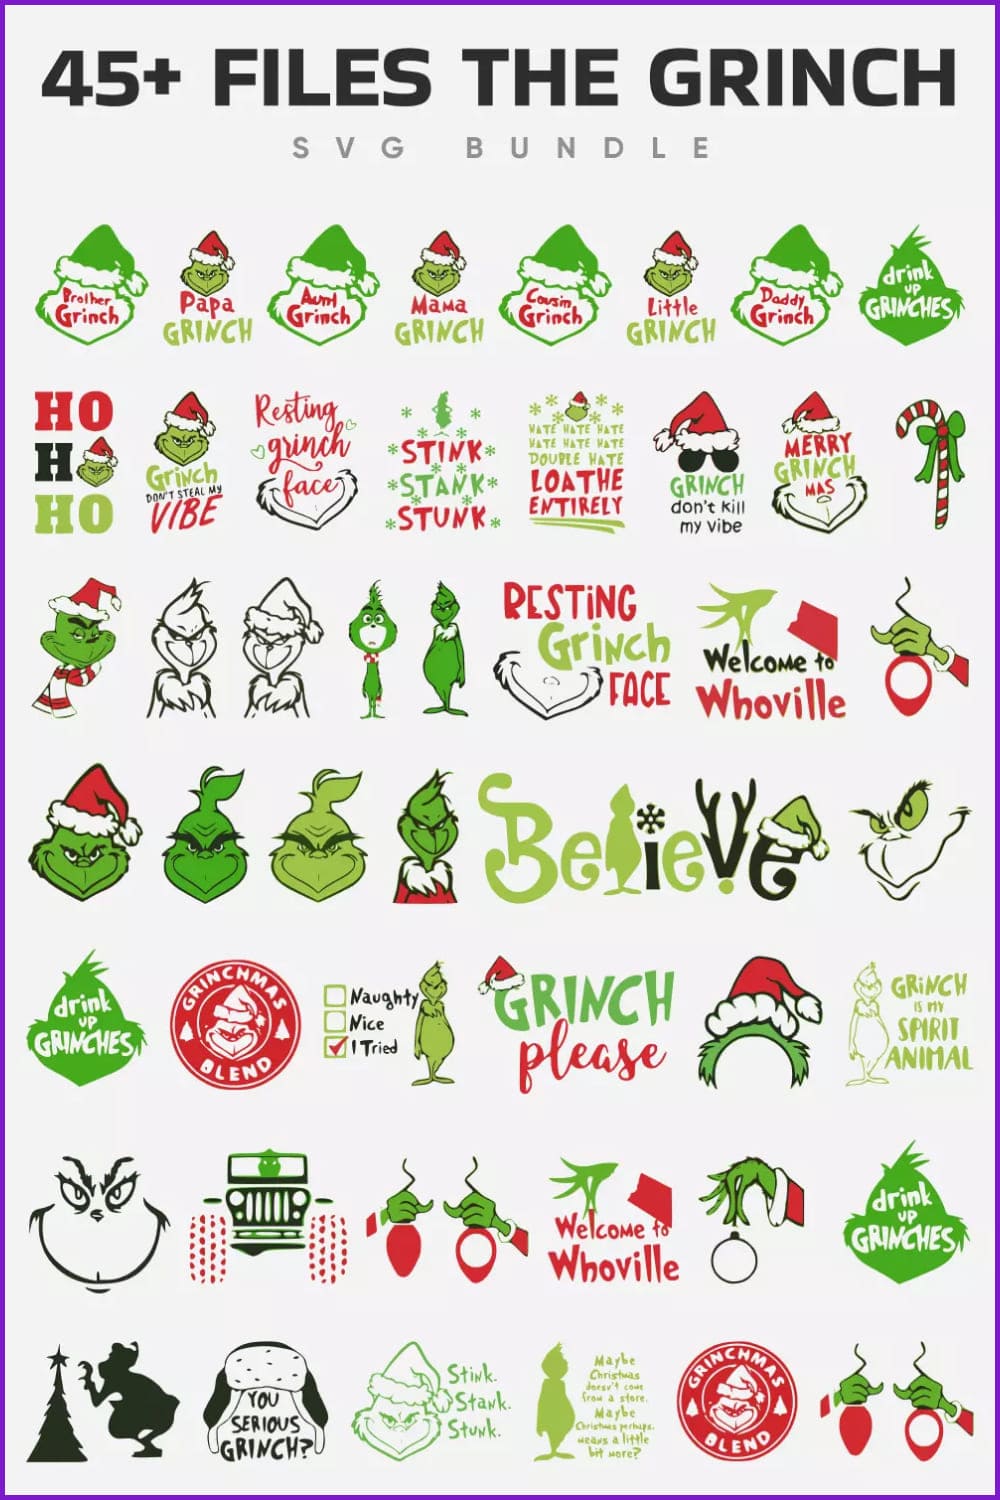 Grinch images in gren black and red colors.